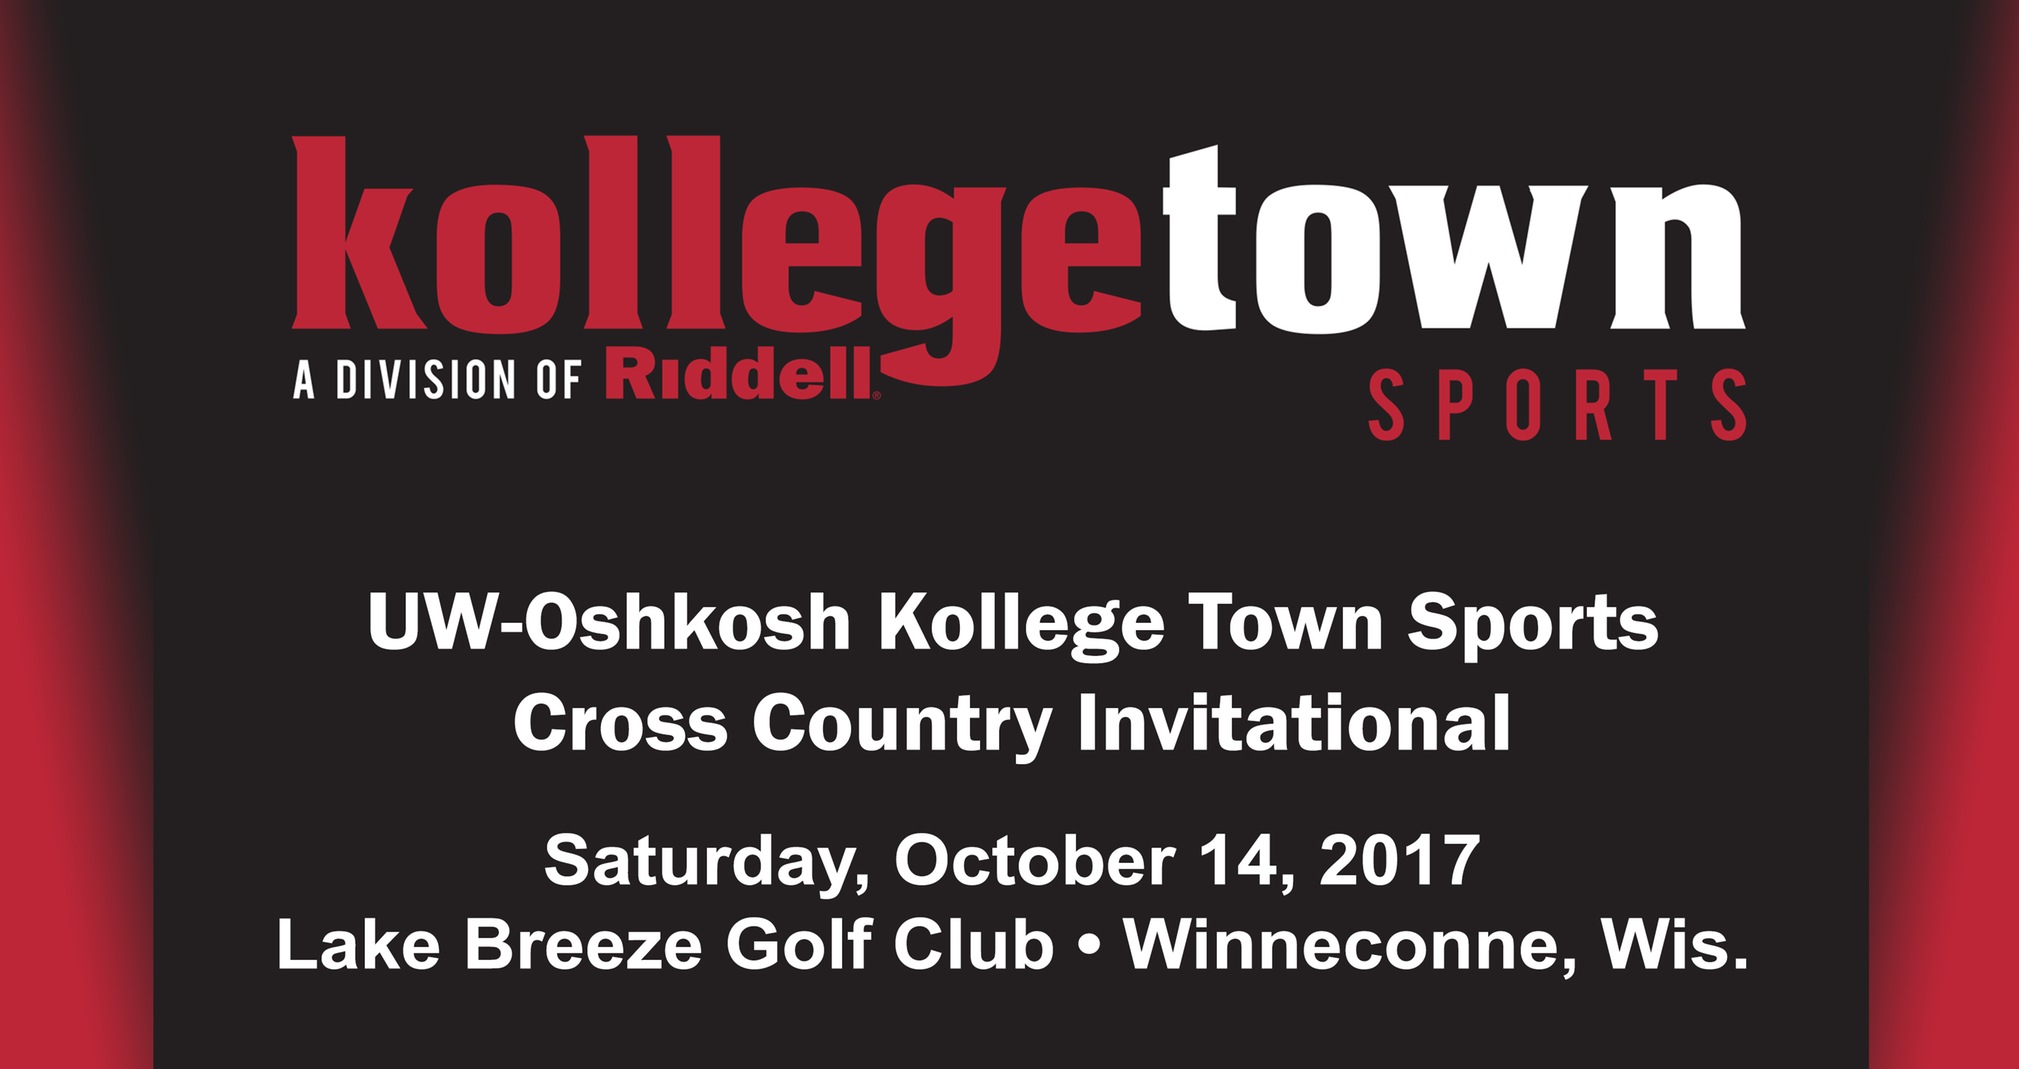 Teams From Six States To Run At Kollege Town Sports Invitational